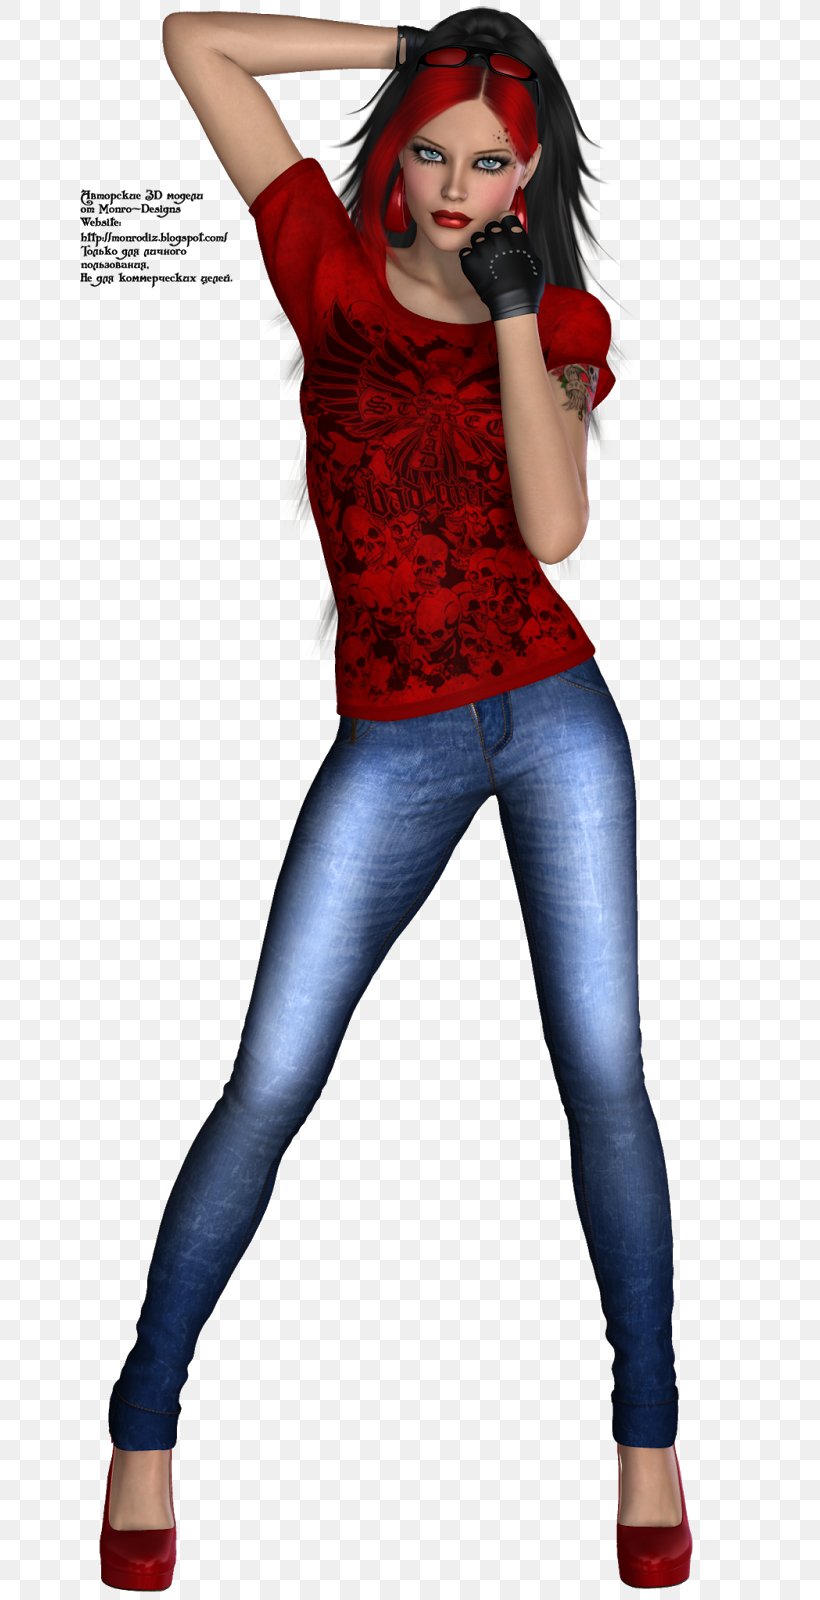 Jeans Shoulder Fashion Leggings Sleeve, PNG, 802x1600px, Jeans, Clothing, Costume, Fashion, Fashion Model Download Free